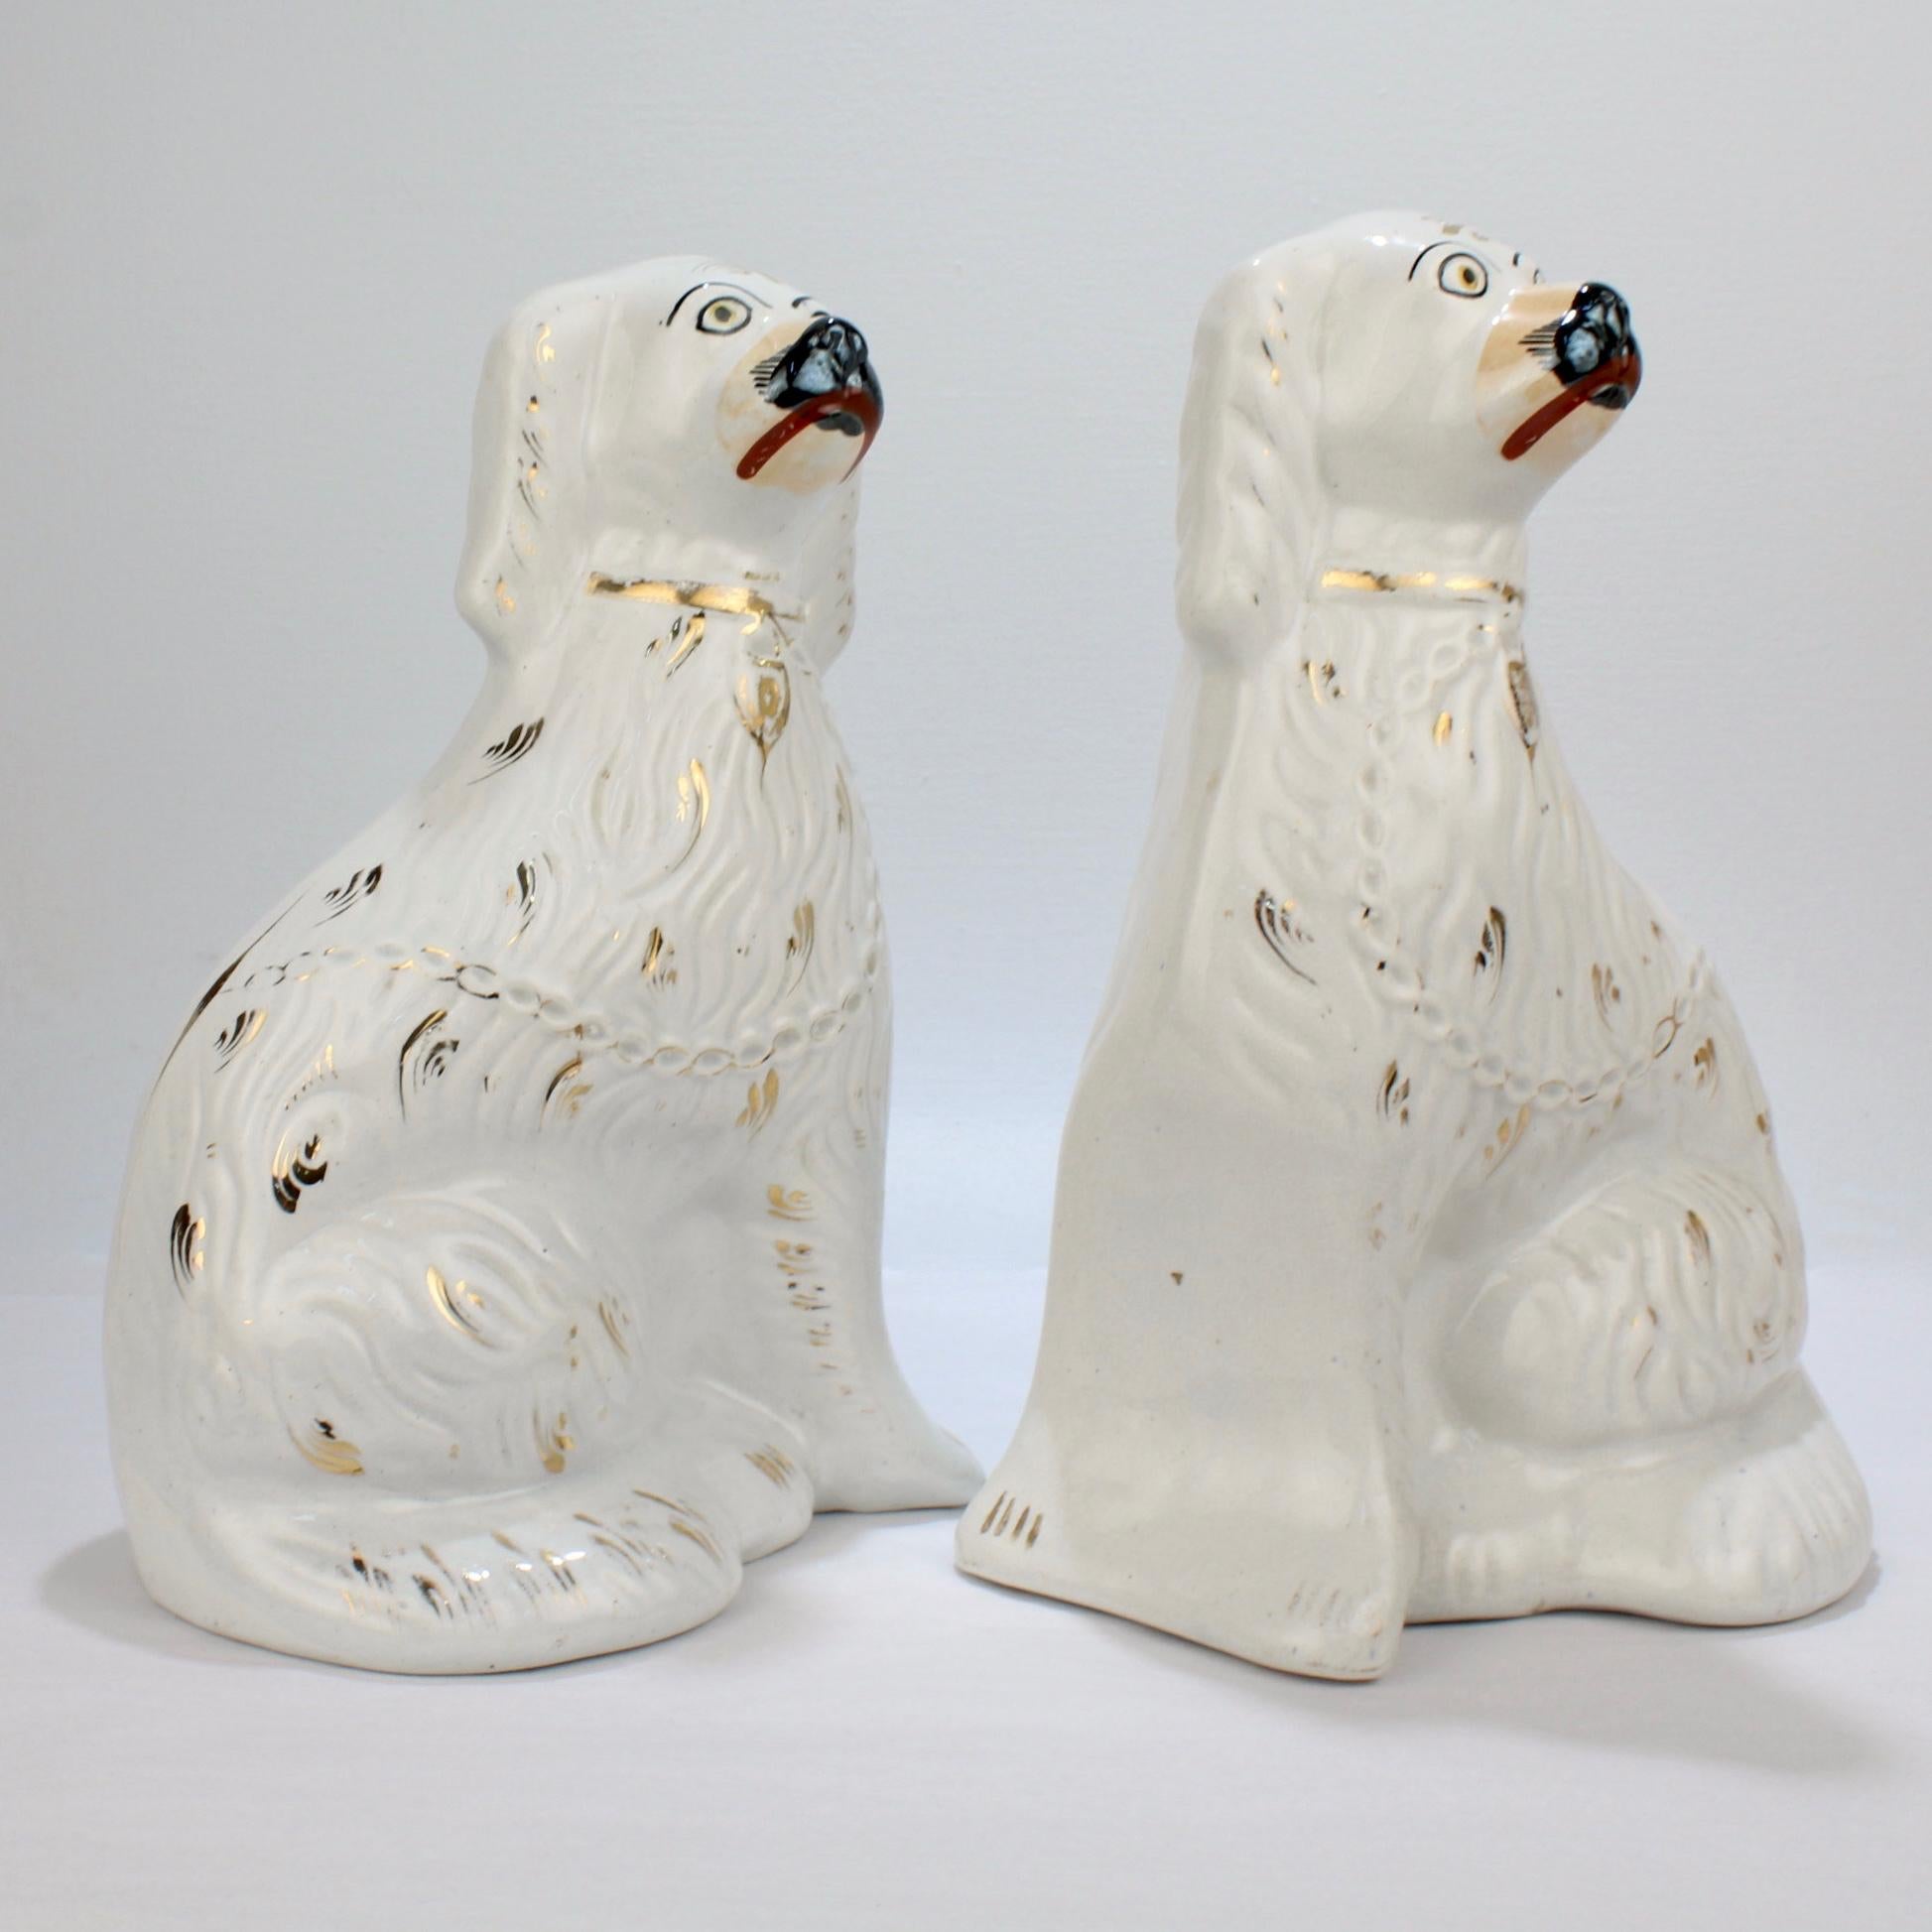 British Pair of Large Matched Antique Staffordshire Pottery Spaniel Dog Figurines